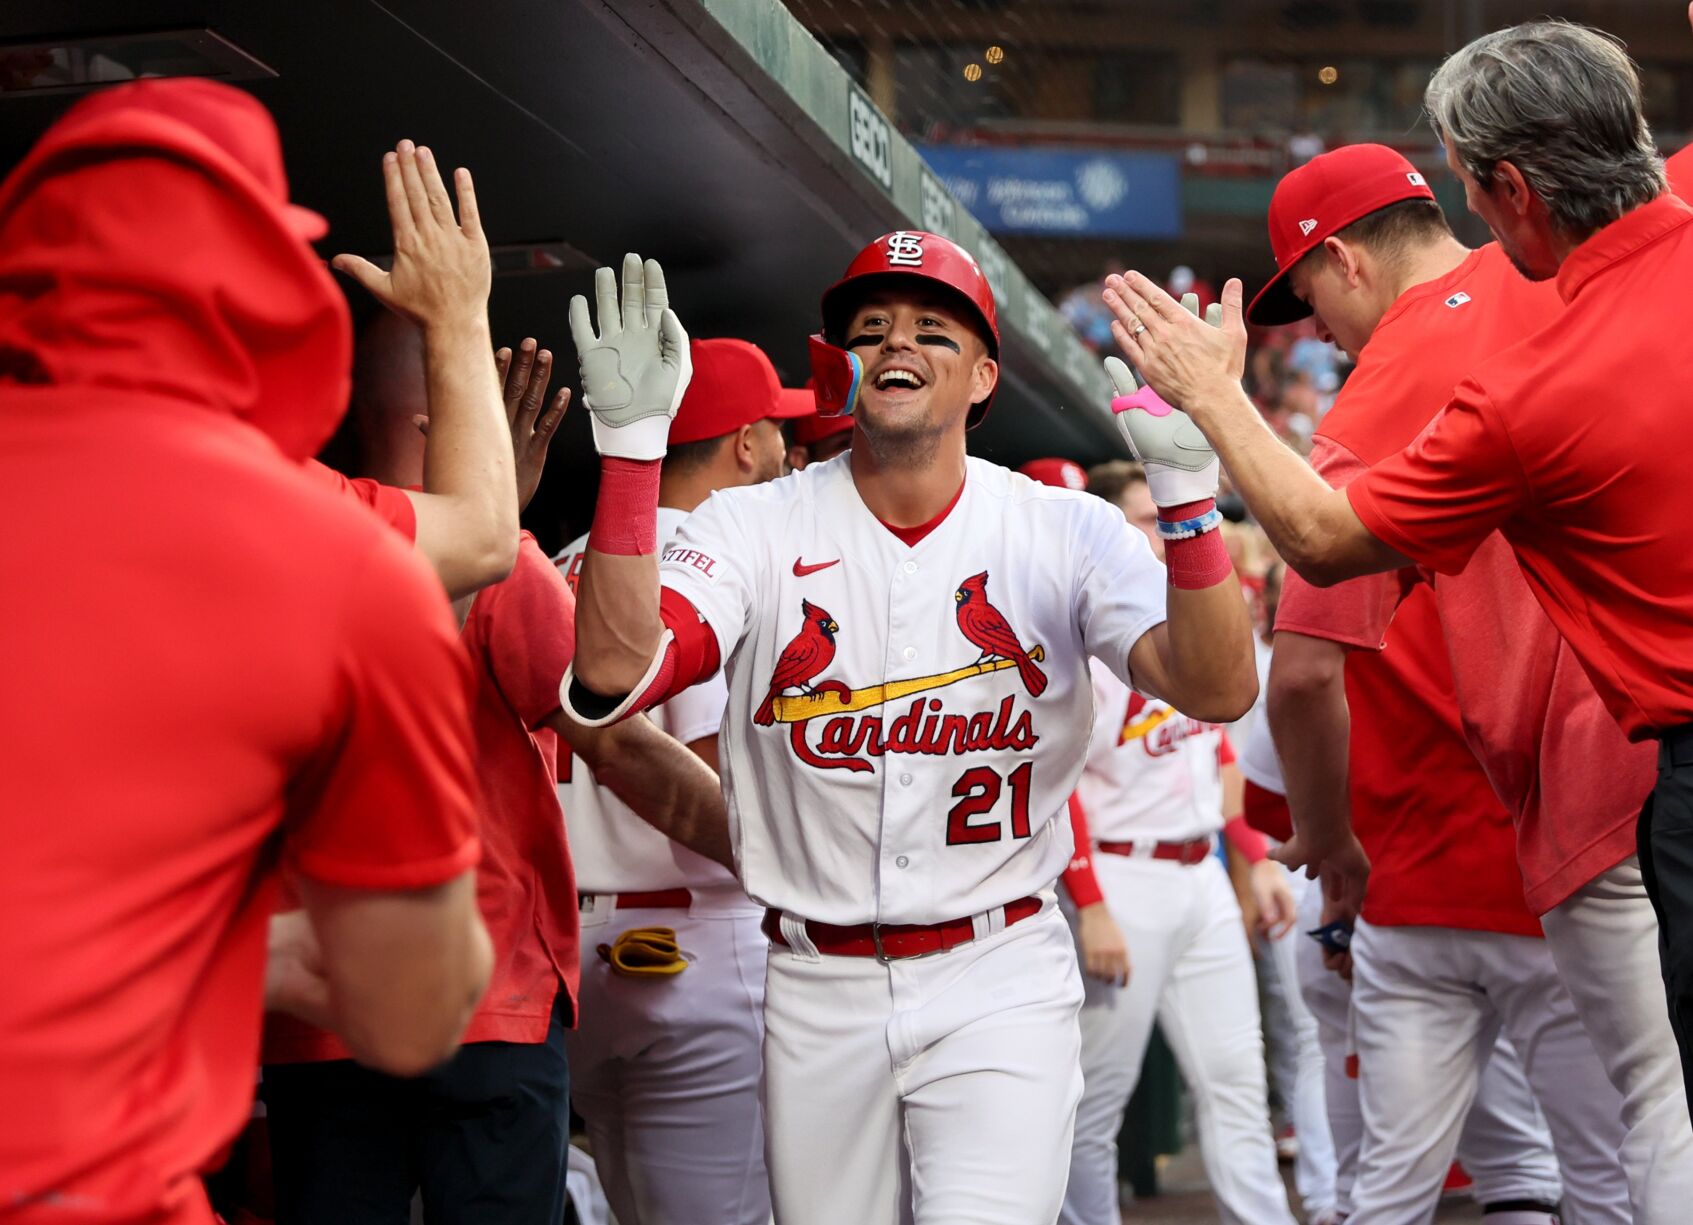 Cardinals to play a doubleheader Saturday after rain suspends Fridays series opener